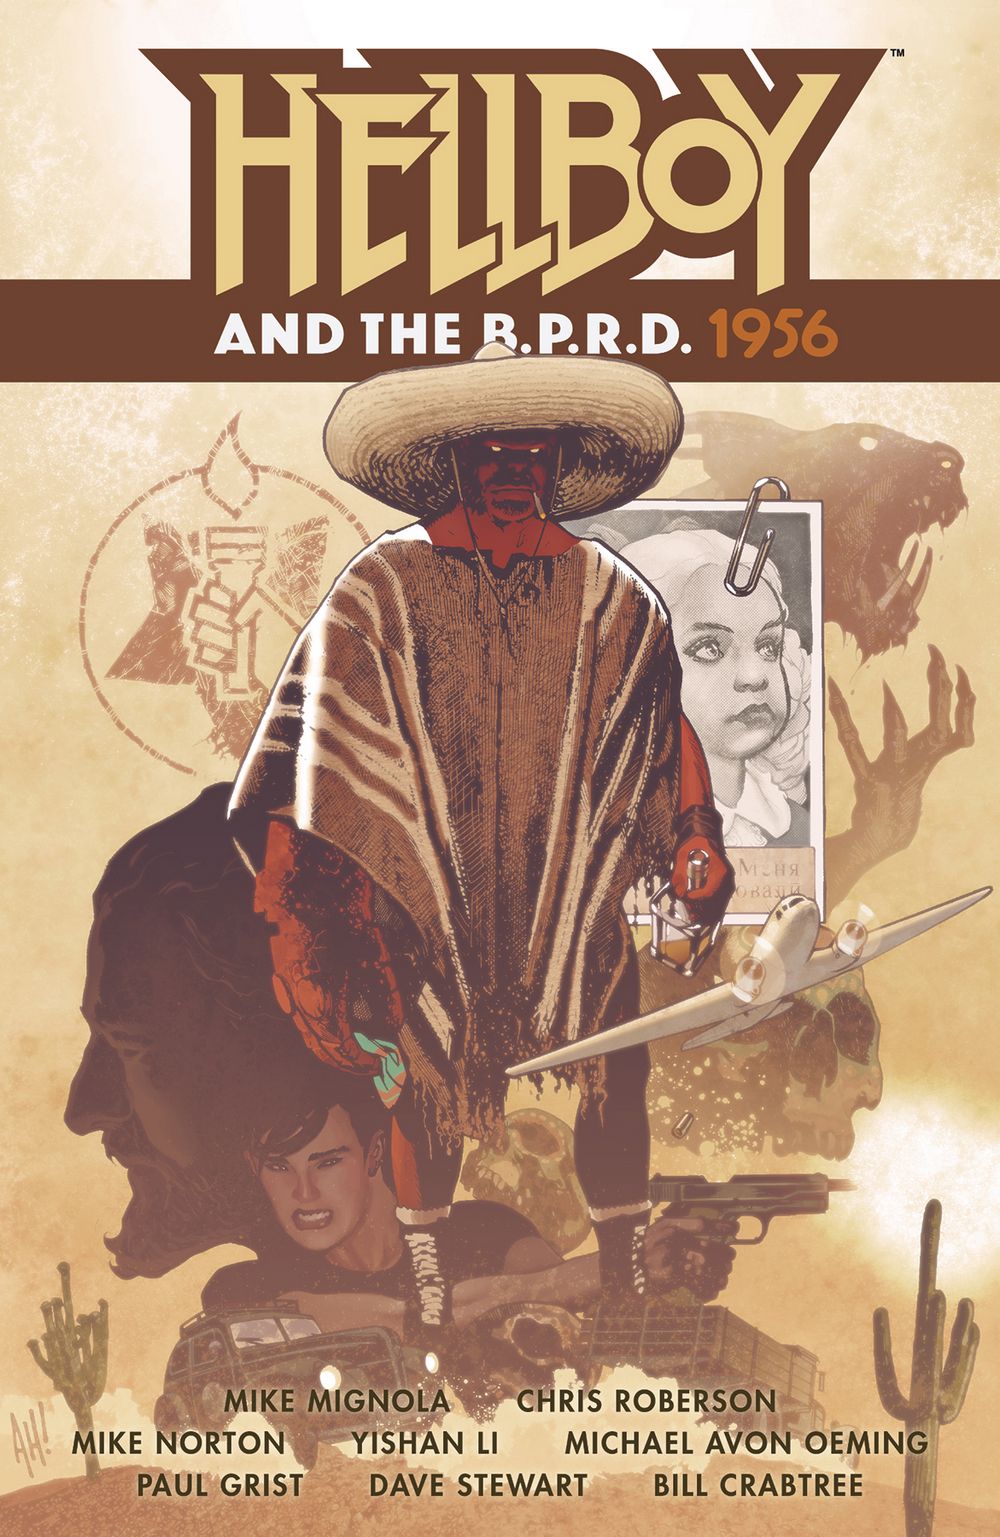 Hellboy and the Bprd 1956 TP